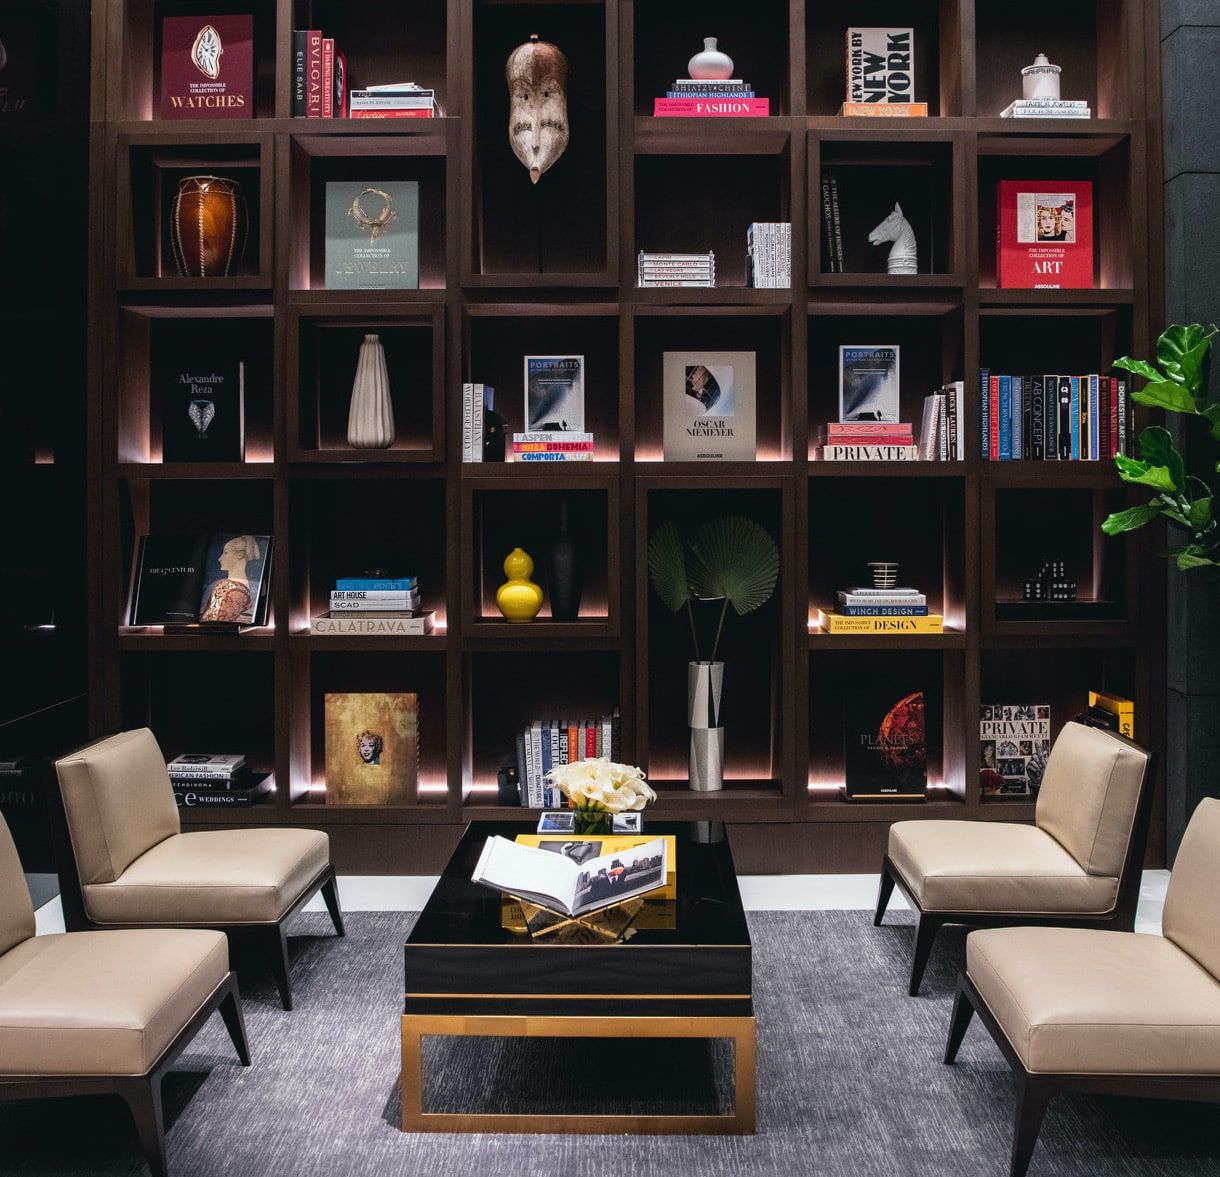 The library at 277 5th Avenue, a luxury condominium in Manhattan, designed by Alex Assouline